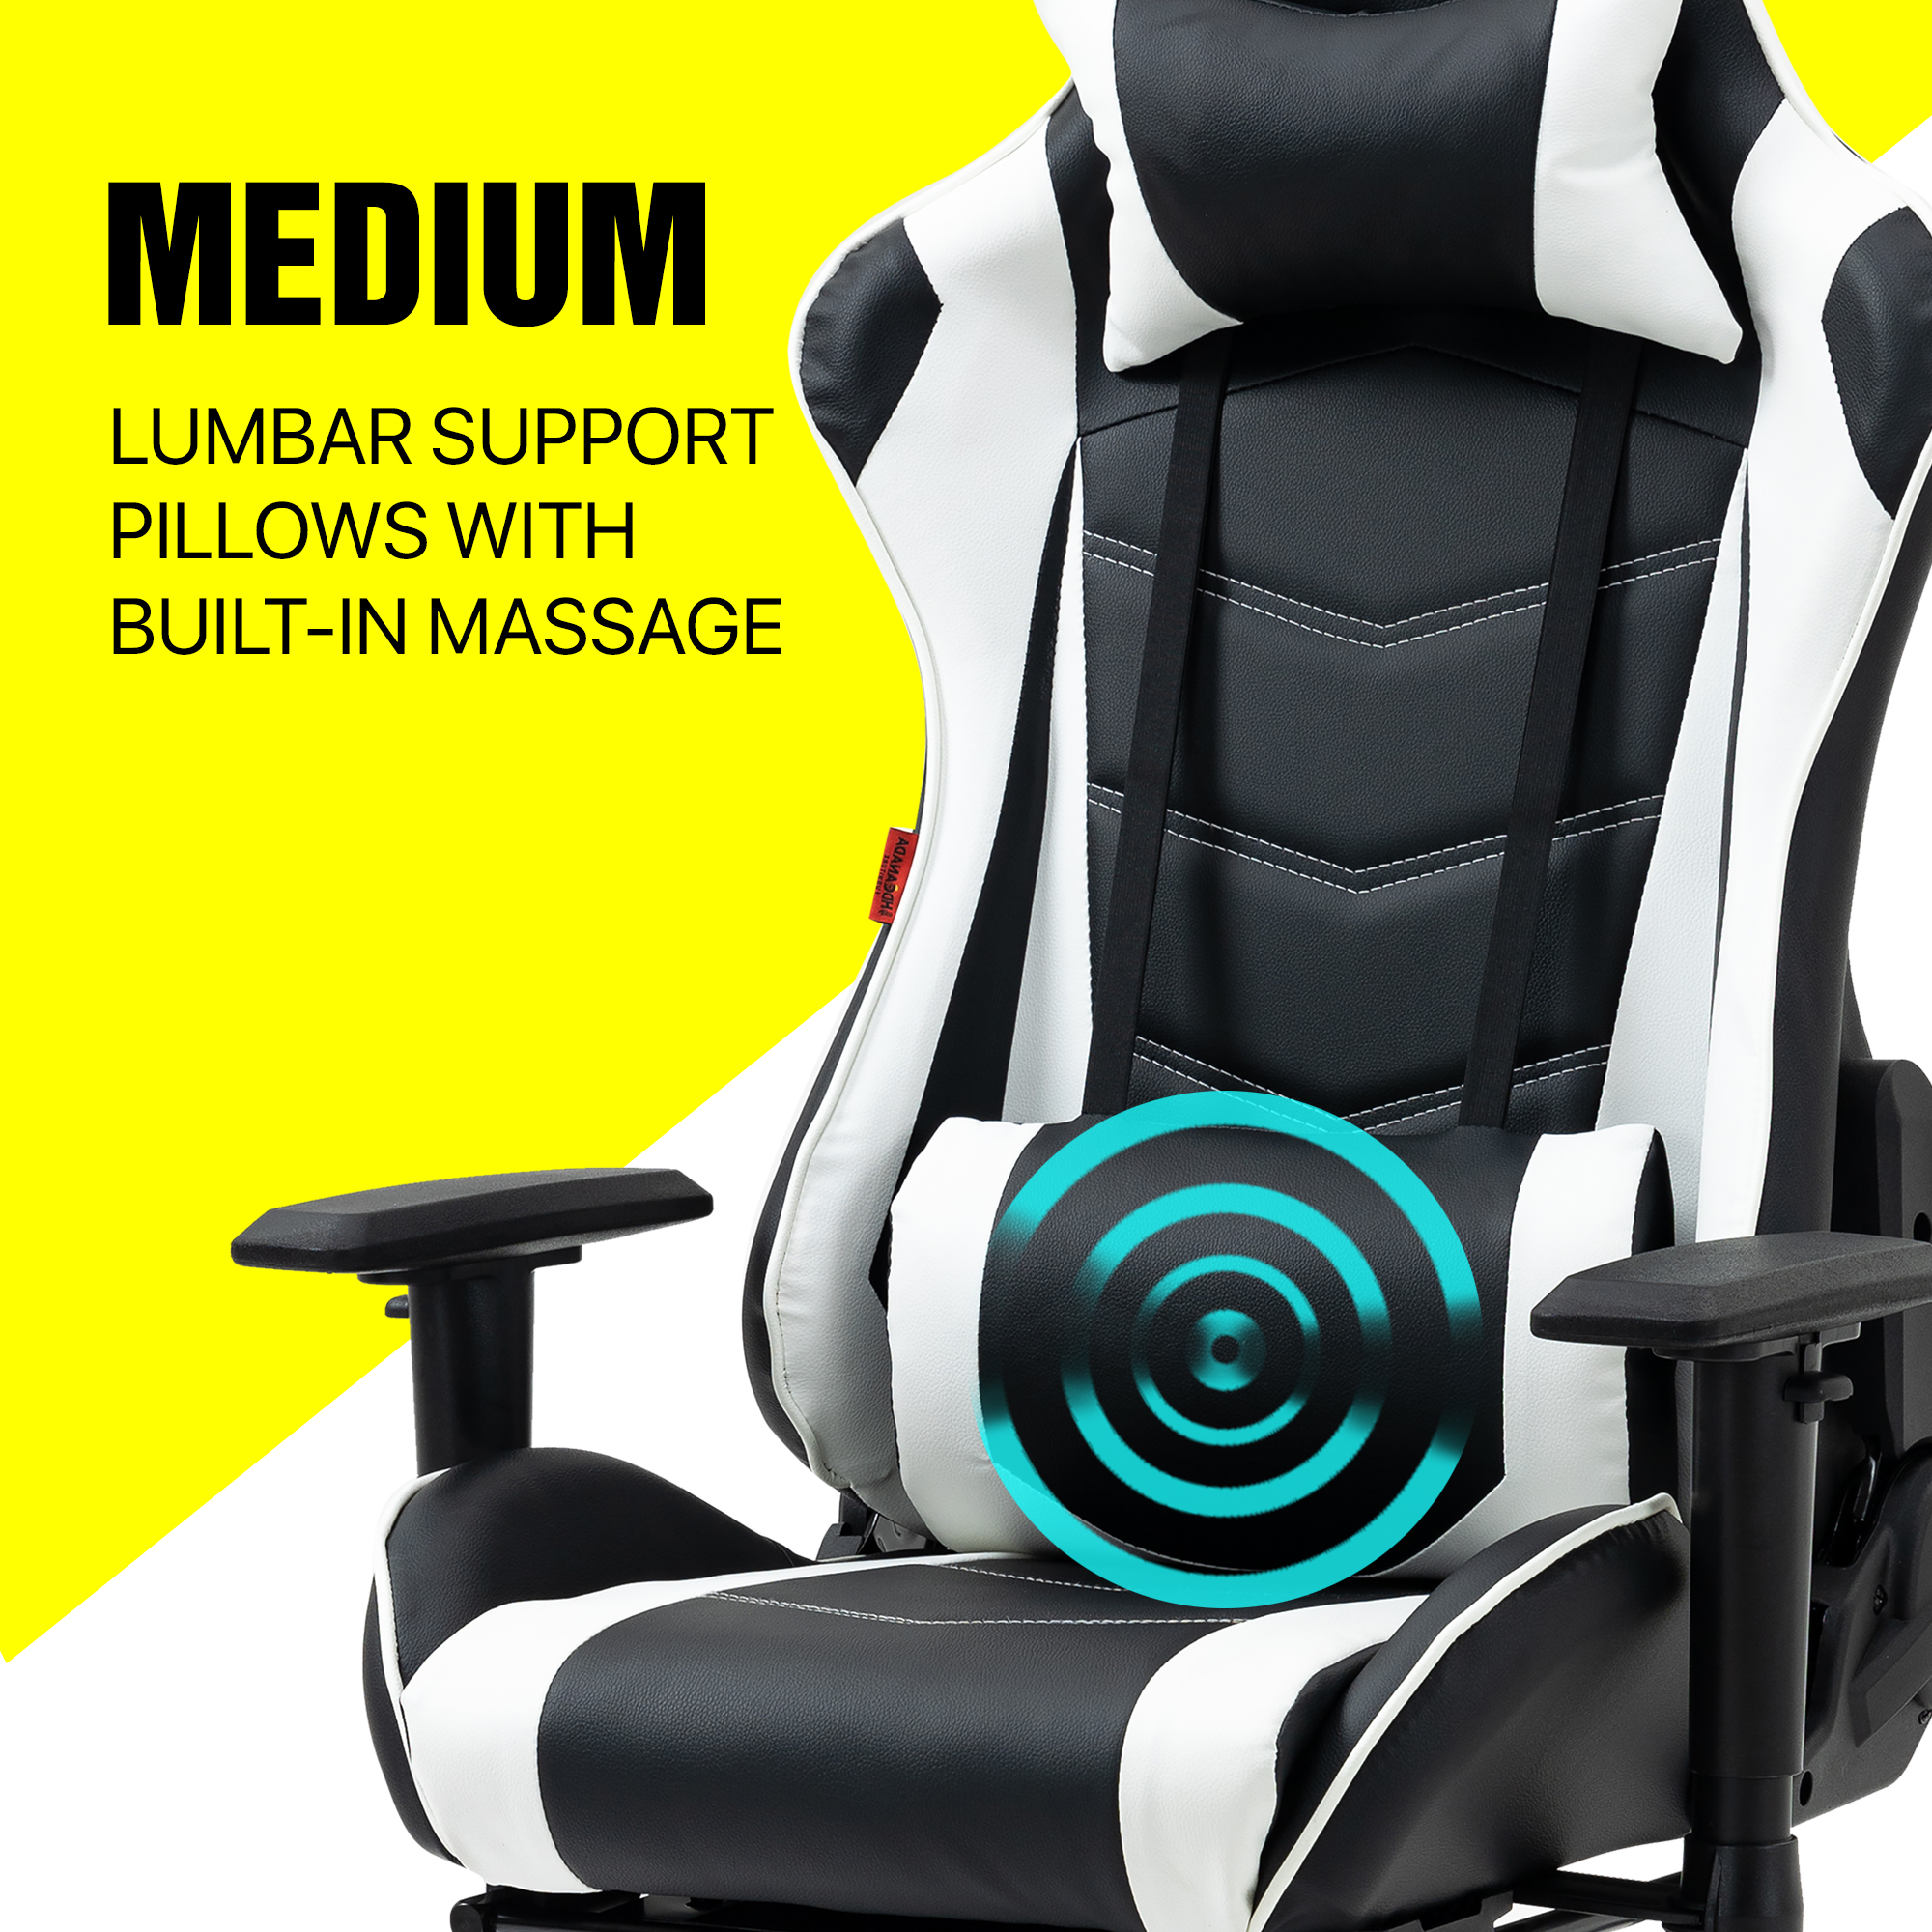 Both the headrest and lumbar massage pillows add an extra layer of comfort 1996 Series Gaming Chair.